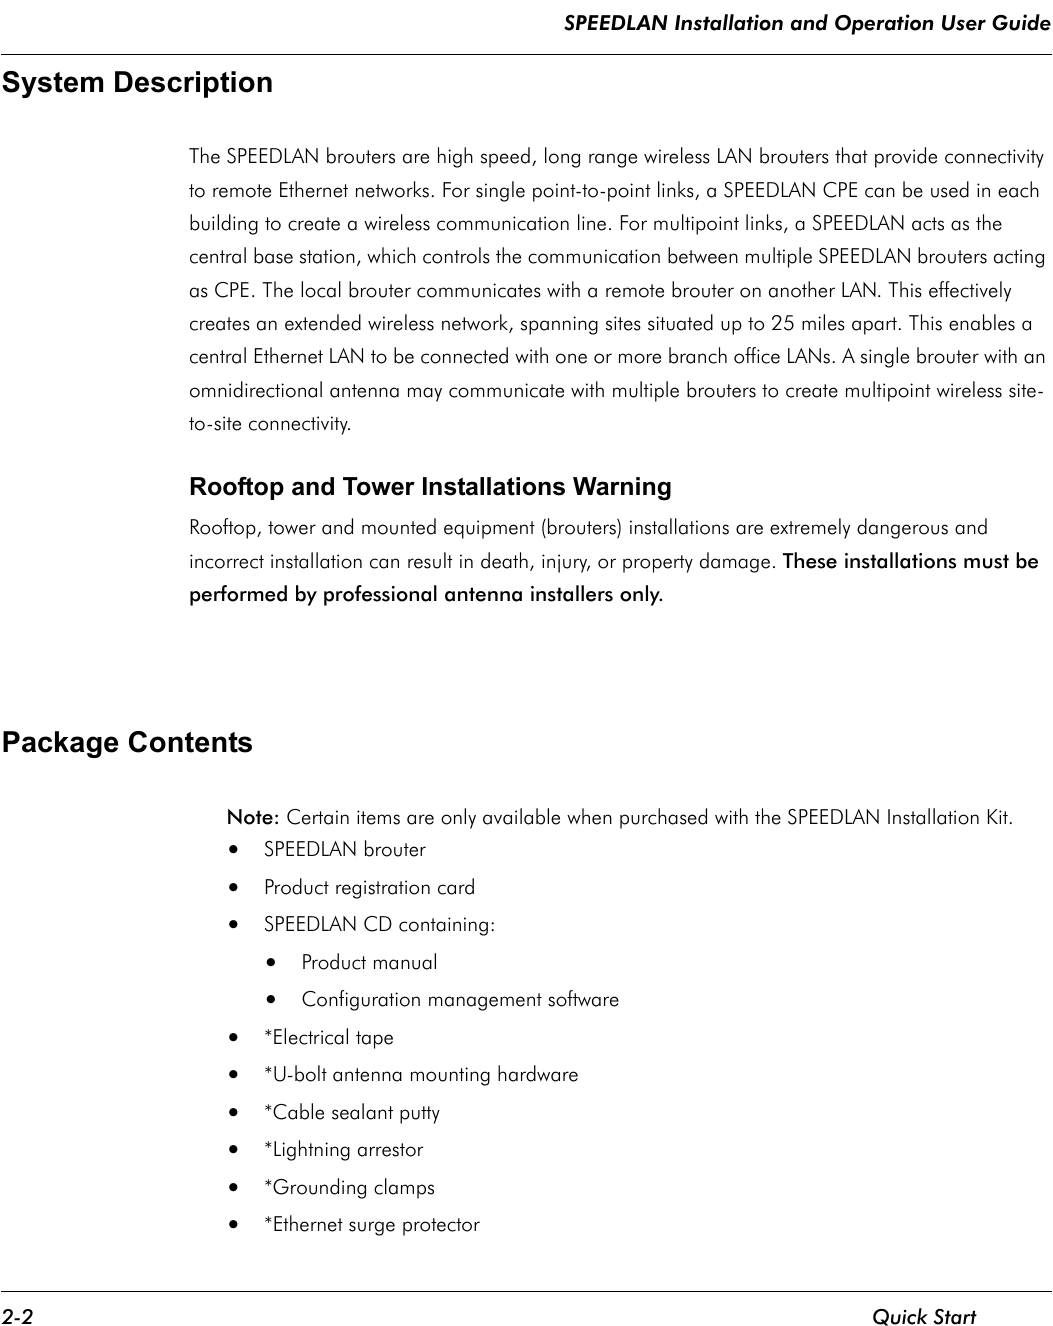 SPEEDLAN Installation and Operation User Guide 2-2 Quick StartSystem Description   The SPEEDLAN brouters are high speed, long range wireless LAN brouters that provide connectivity to remote Ethernet networks. For single point-to-point links, a SPEEDLAN CPE can be used in each building to create a wireless communication line. For multipoint links, a SPEEDLAN acts as the central base station, which controls the communication between multiple SPEEDLAN brouters acting as CPE. The local brouter communicates with a remote brouter on another LAN. This effectively creates an extended wireless network, spanning sites situated up to 25 miles apart. This enables a central Ethernet LAN to be connected with one or more branch office LANs. A single brouter with an omnidirectional antenna may communicate with multiple brouters to create multipoint wireless site-to-site connectivity.    Rooftop and Tower Installations Warning Rooftop, tower and mounted equipment (brouters) installations are extremely dangerous and incorrect installation can result in death, injury, or property damage. These installations must be performed by professional antenna installers only.   Package Contents Note:    Certain items are only available when purchased with the SPEEDLAN Installation Kit. •SPEEDLAN brouter •Product registration card •SPEEDLAN CD containing: •Product manual •Configuration management software •*Electrical tape •*U-bolt antenna mounting hardware •*Cable sealant putty •*Lightning arrestor •*Grounding clamps •*Ethernet surge protector              